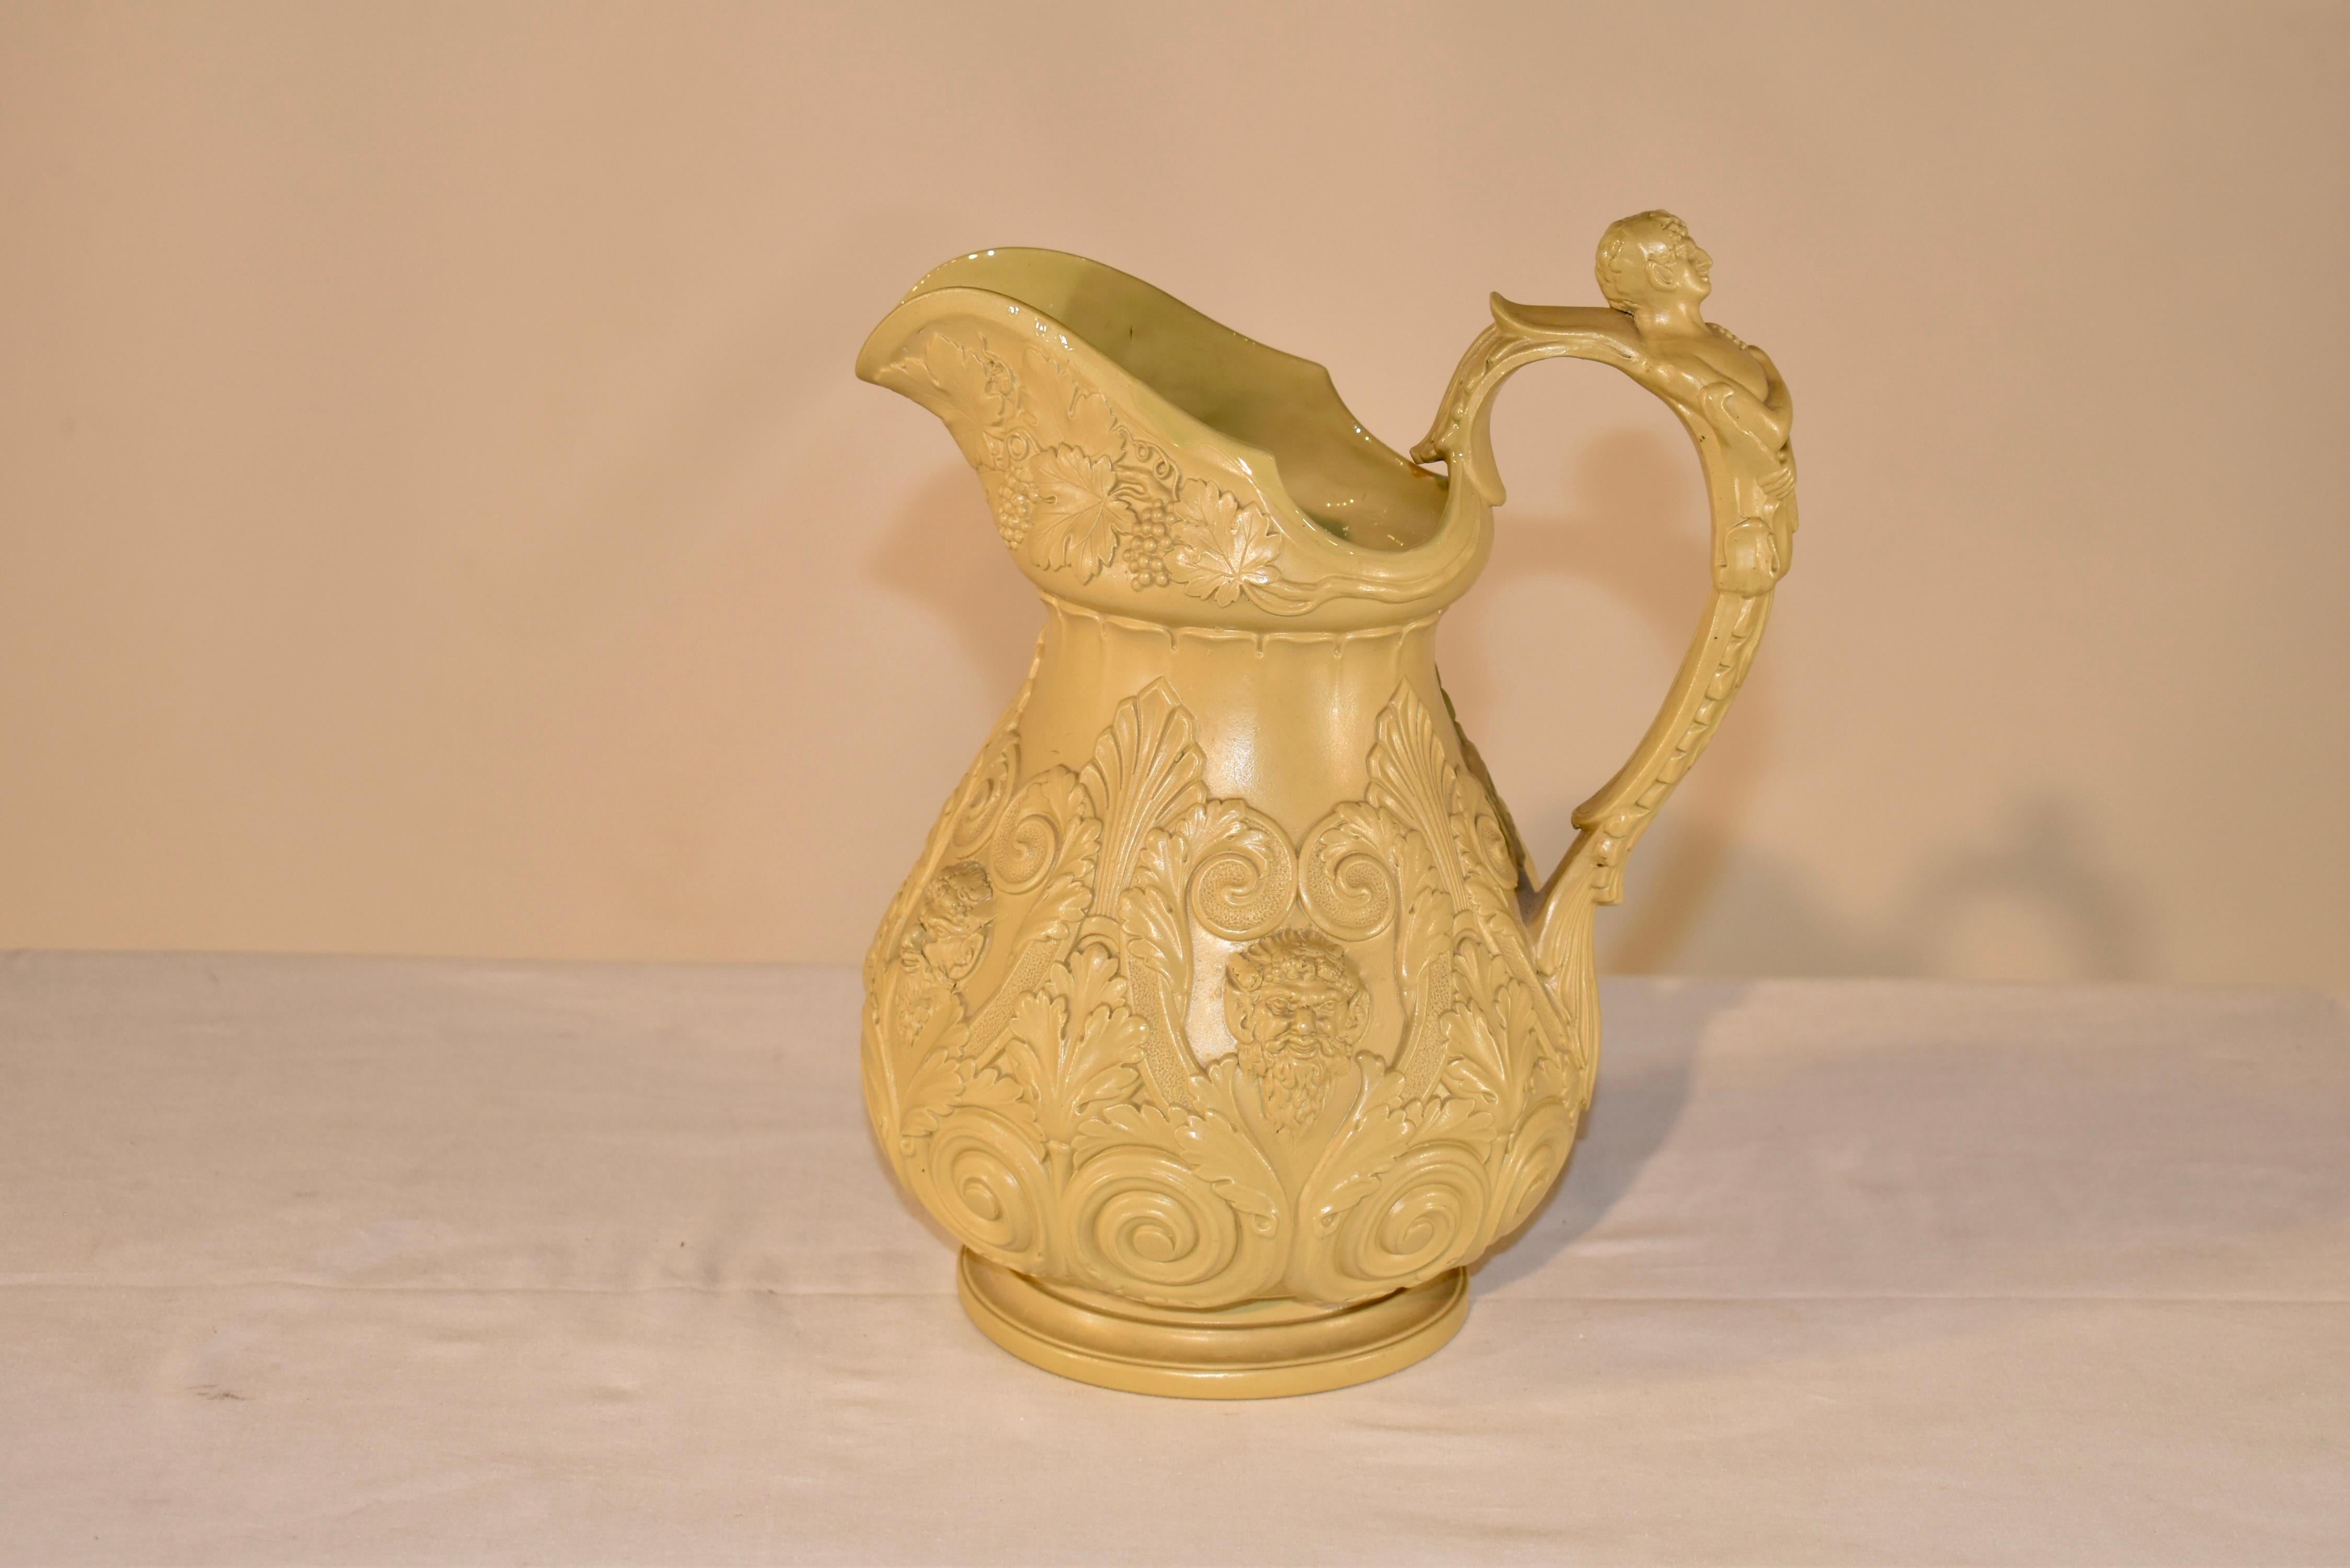 Early 19th century drab ware pitcher attributed to W. Ridgway & Co. Hanley. This is a wonderful wine jug with the most wonderfully and crisply relieved decoration with Bacchus and grape leaves, vines, and grapes. The handle is spectacularly molded